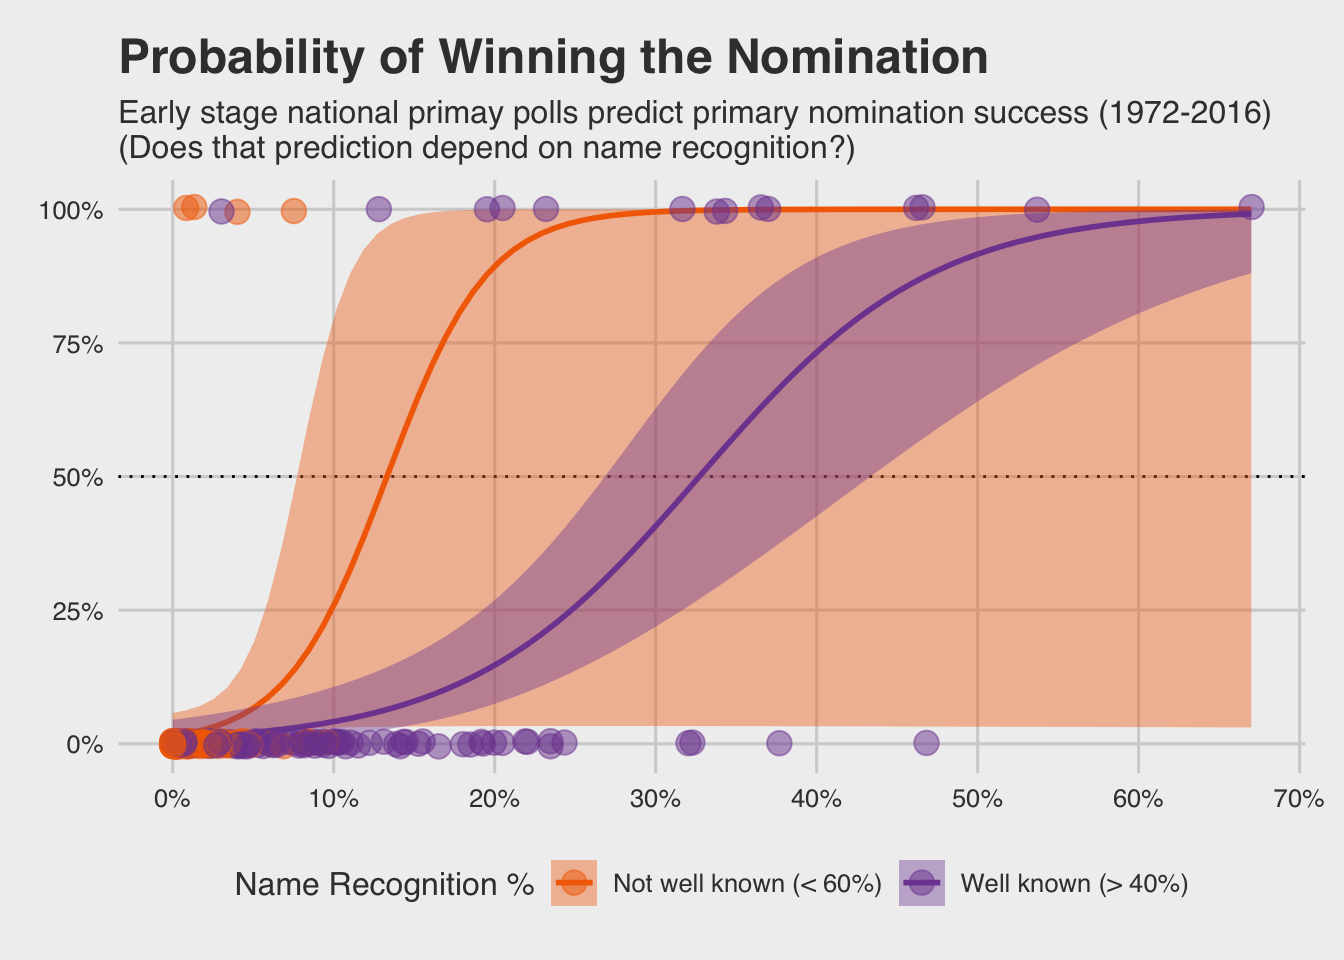 The ribbons represent [95% confidence intervals](https://rpsychologist.com/d3/CI/) around the predictions. The orange ribbon (not well known) envelops most of the figure because no data are available in that range.